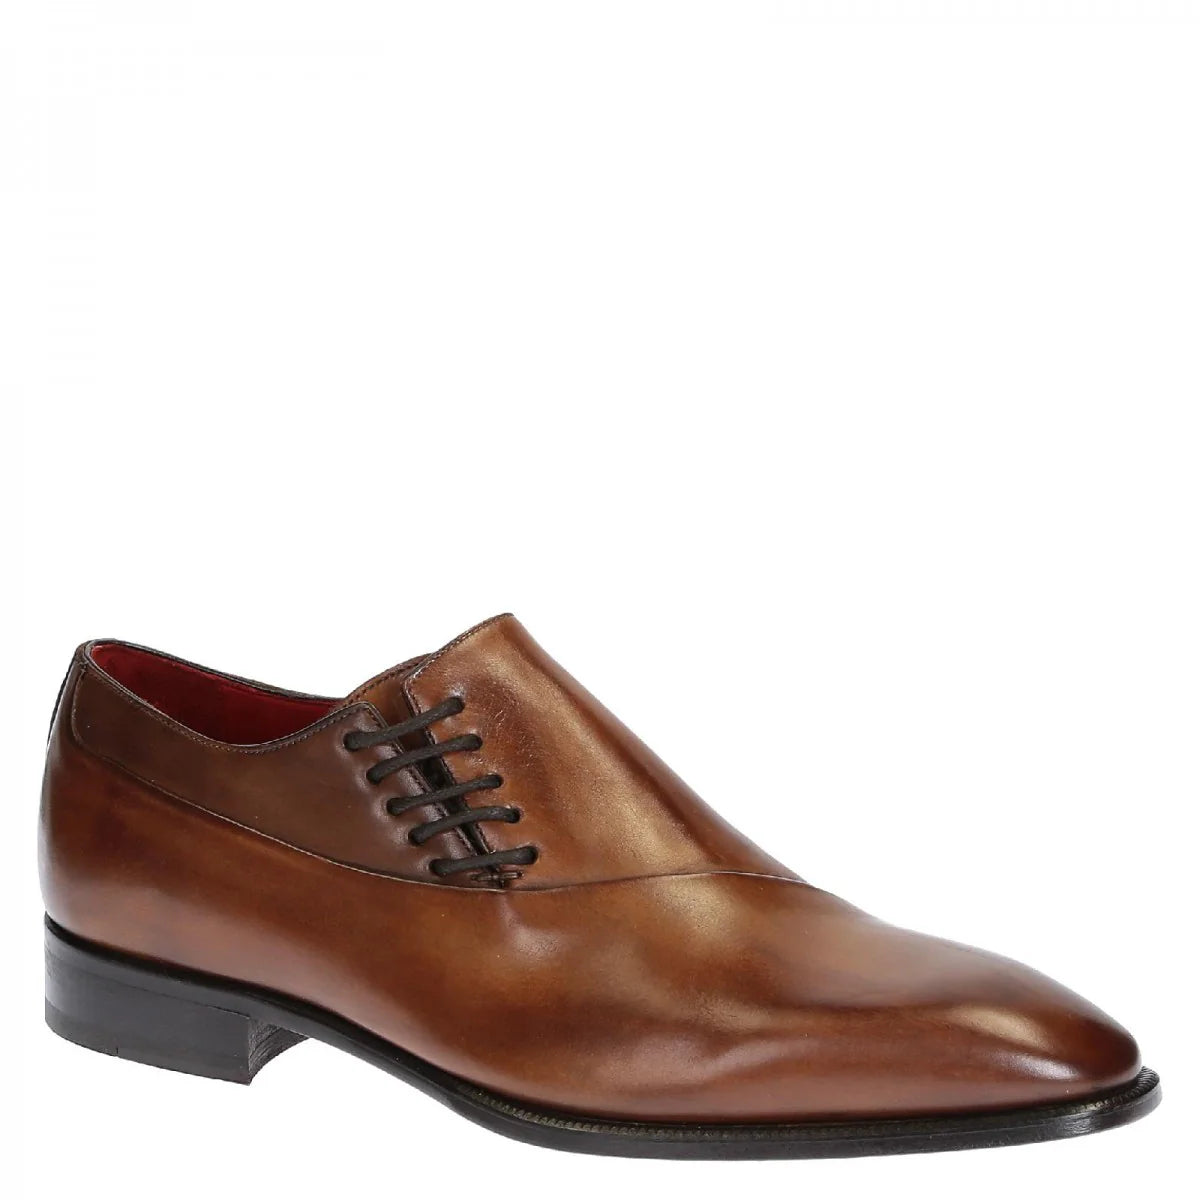 Light brown leather dress shoes